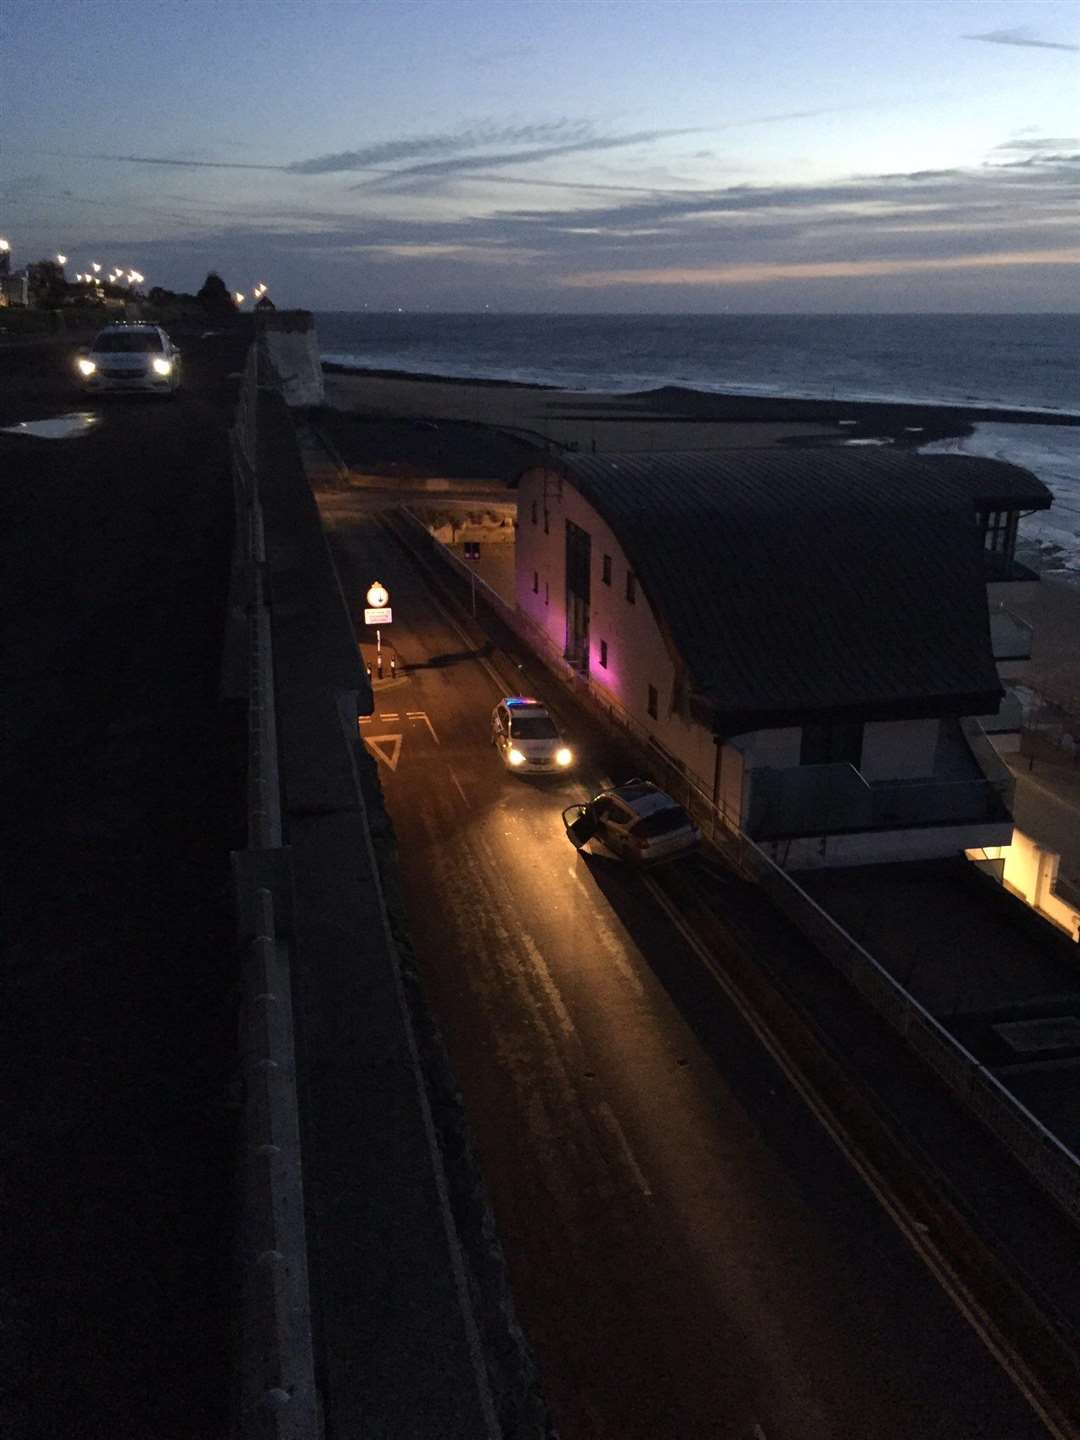 Police are appealing for witnesses after a serious crash on Ramsgate seafront - after crashing off a cliff in police pursuit. Picture: Kent Police RPU (7034647)